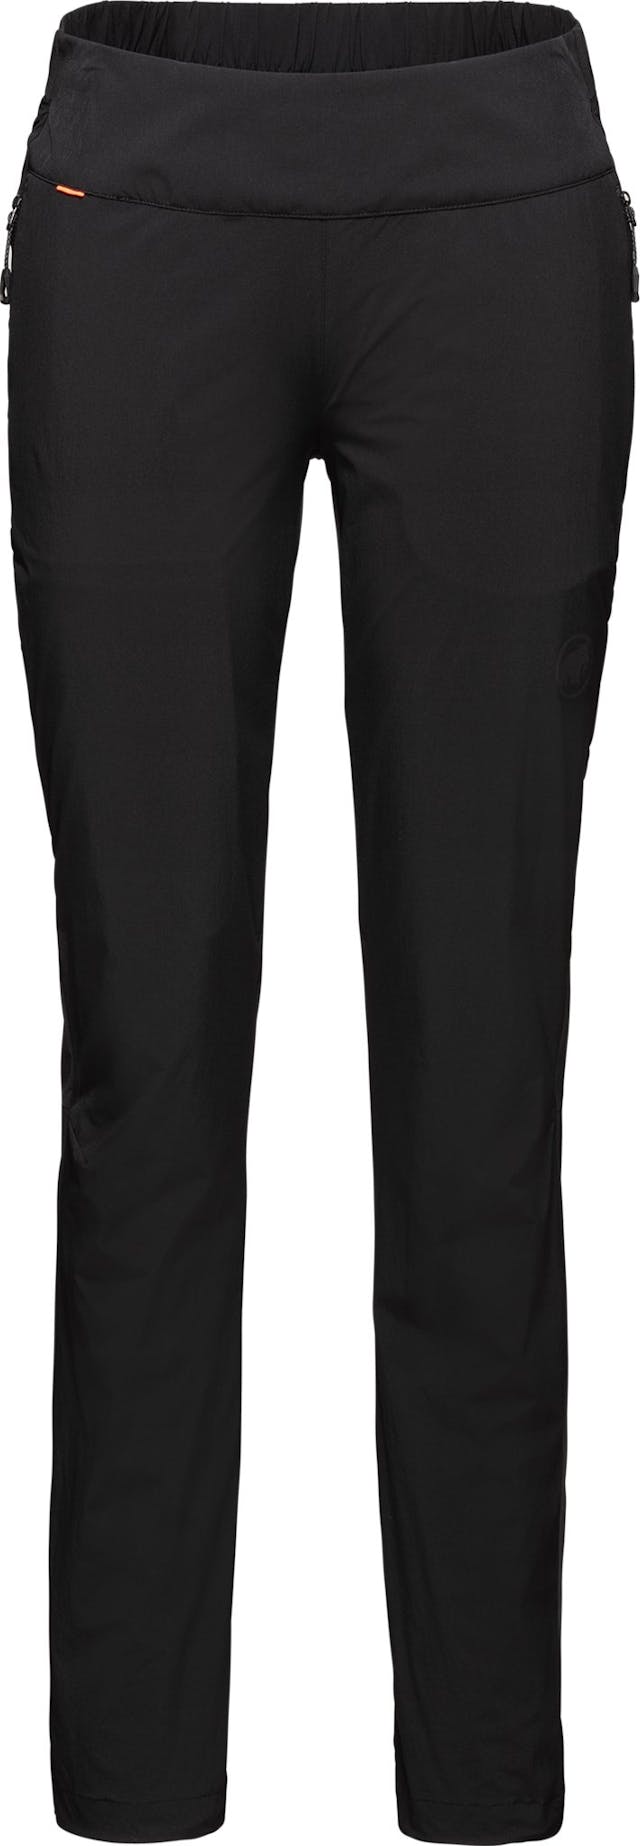 Product image for Runbold Light Pants - Women's